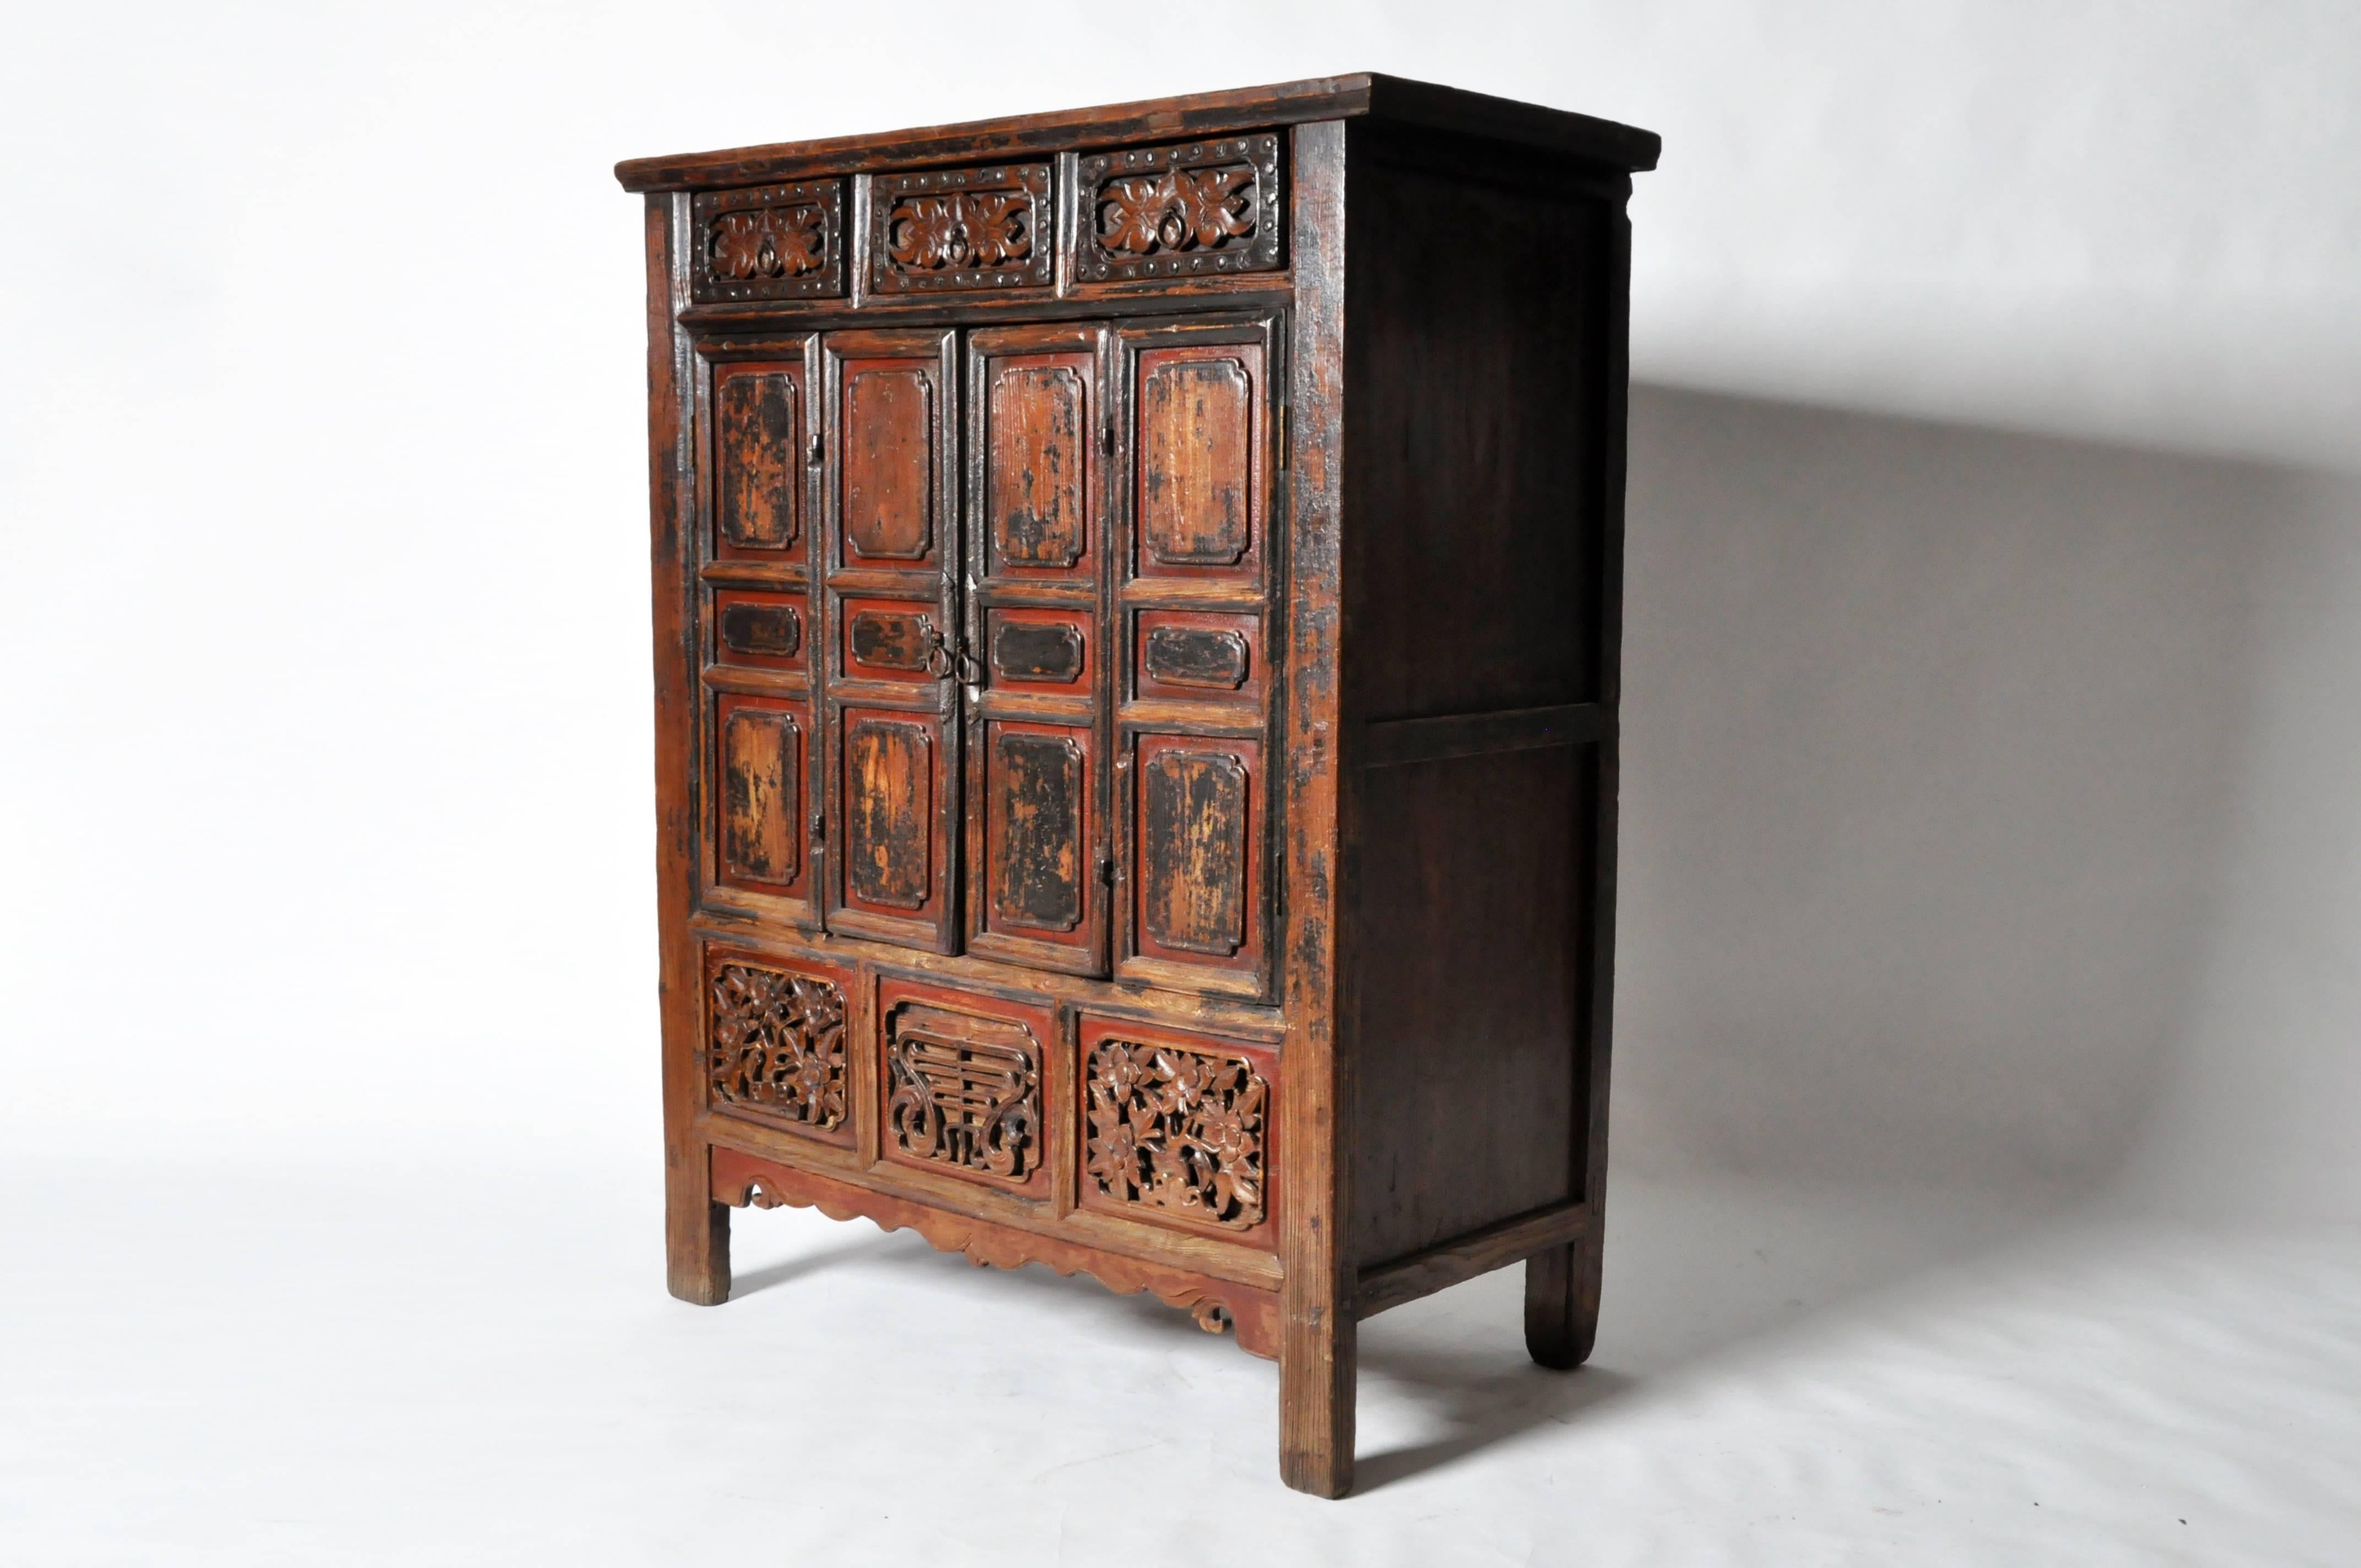 This Chinese oxblood lacquer cabinet is from China and is made from elmwood and oxblood lacquer, mid-19th century. It features bi-fold doors, three drawers for storage, and a hidden compartment underneath inside the cabinet.